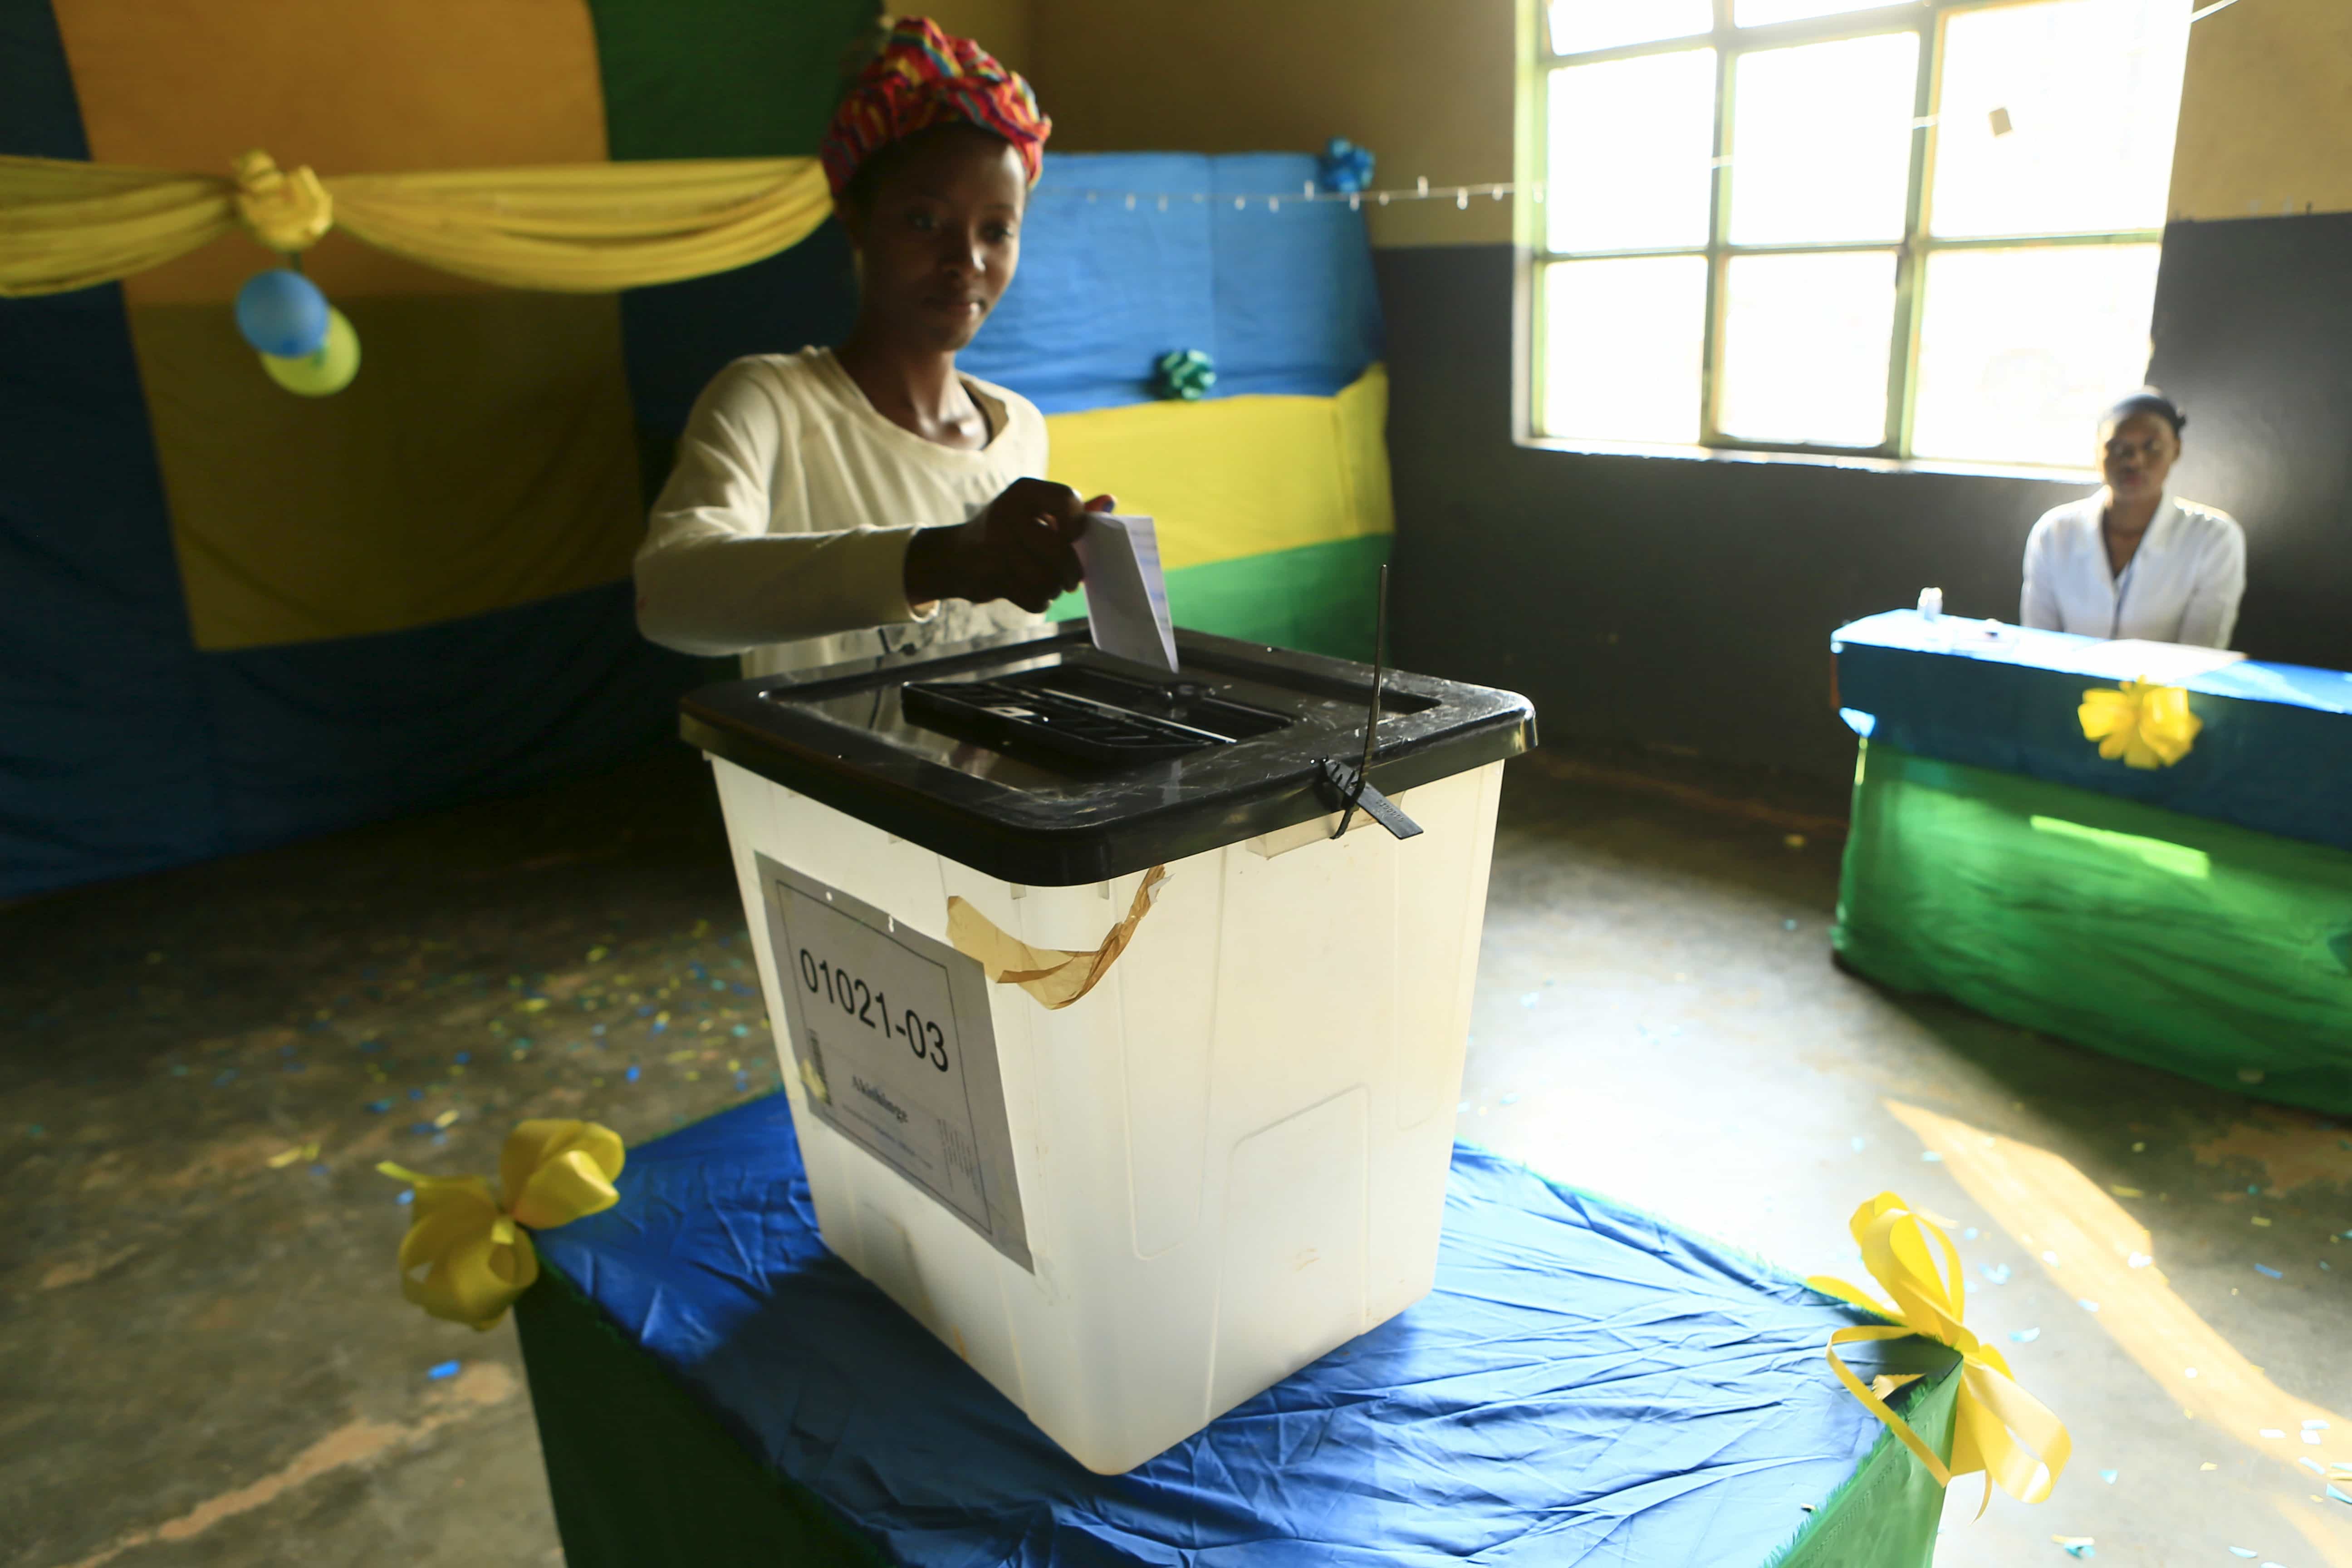 A woman casts her vote at a polling station in Rwanda's capital Kigali, 18 December 2015, REUTERS/James Akena